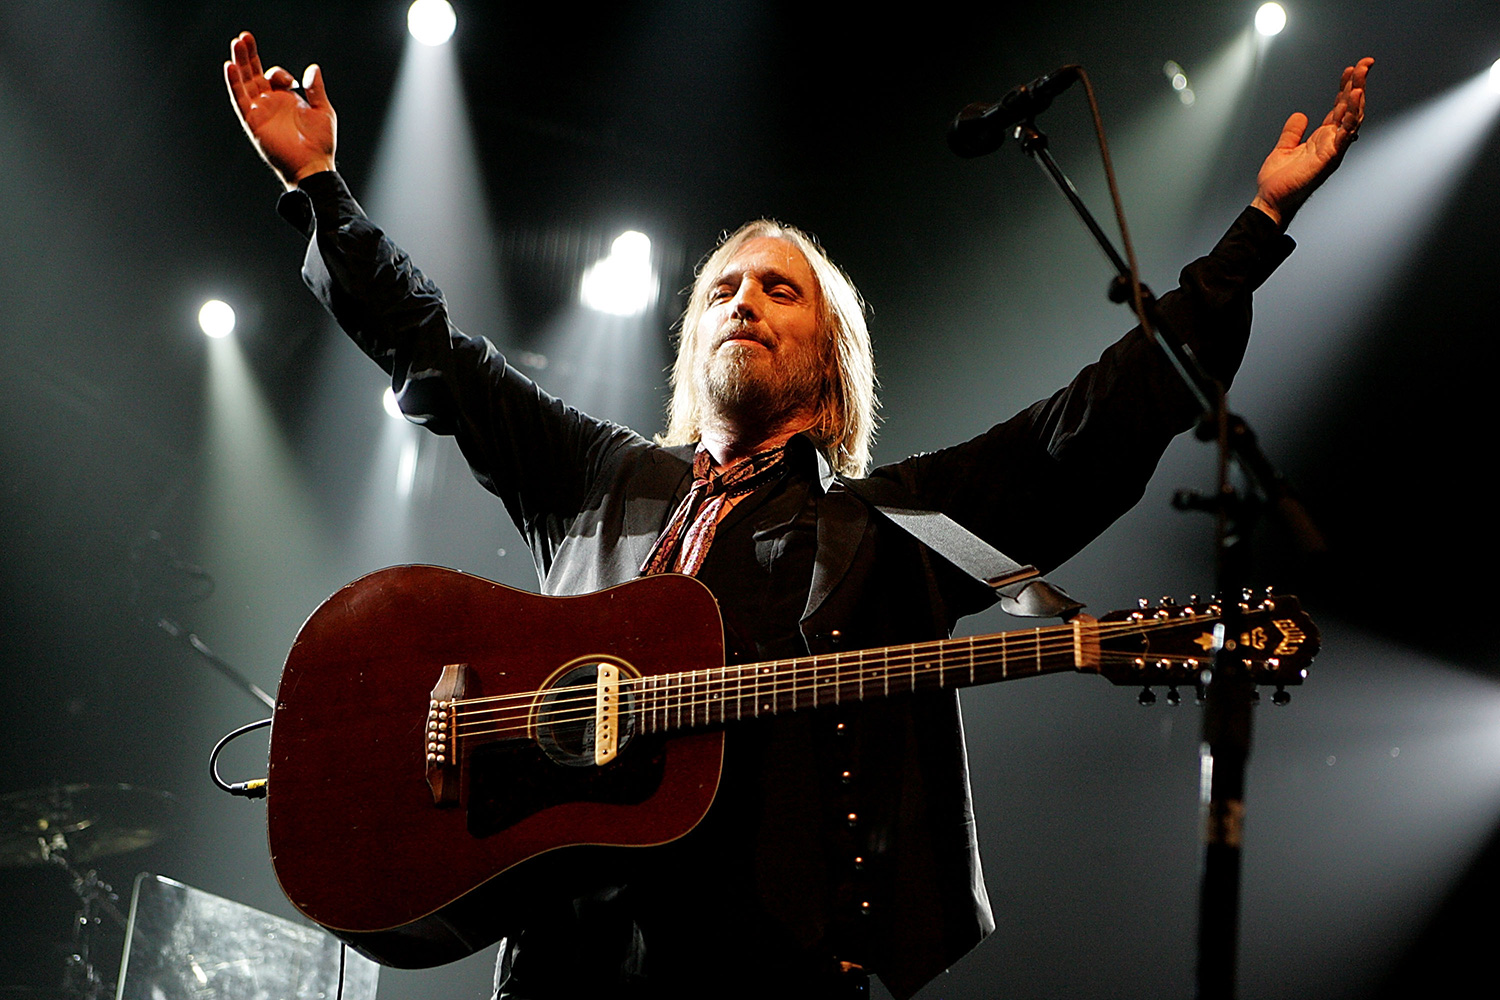 Tom Petty hands up